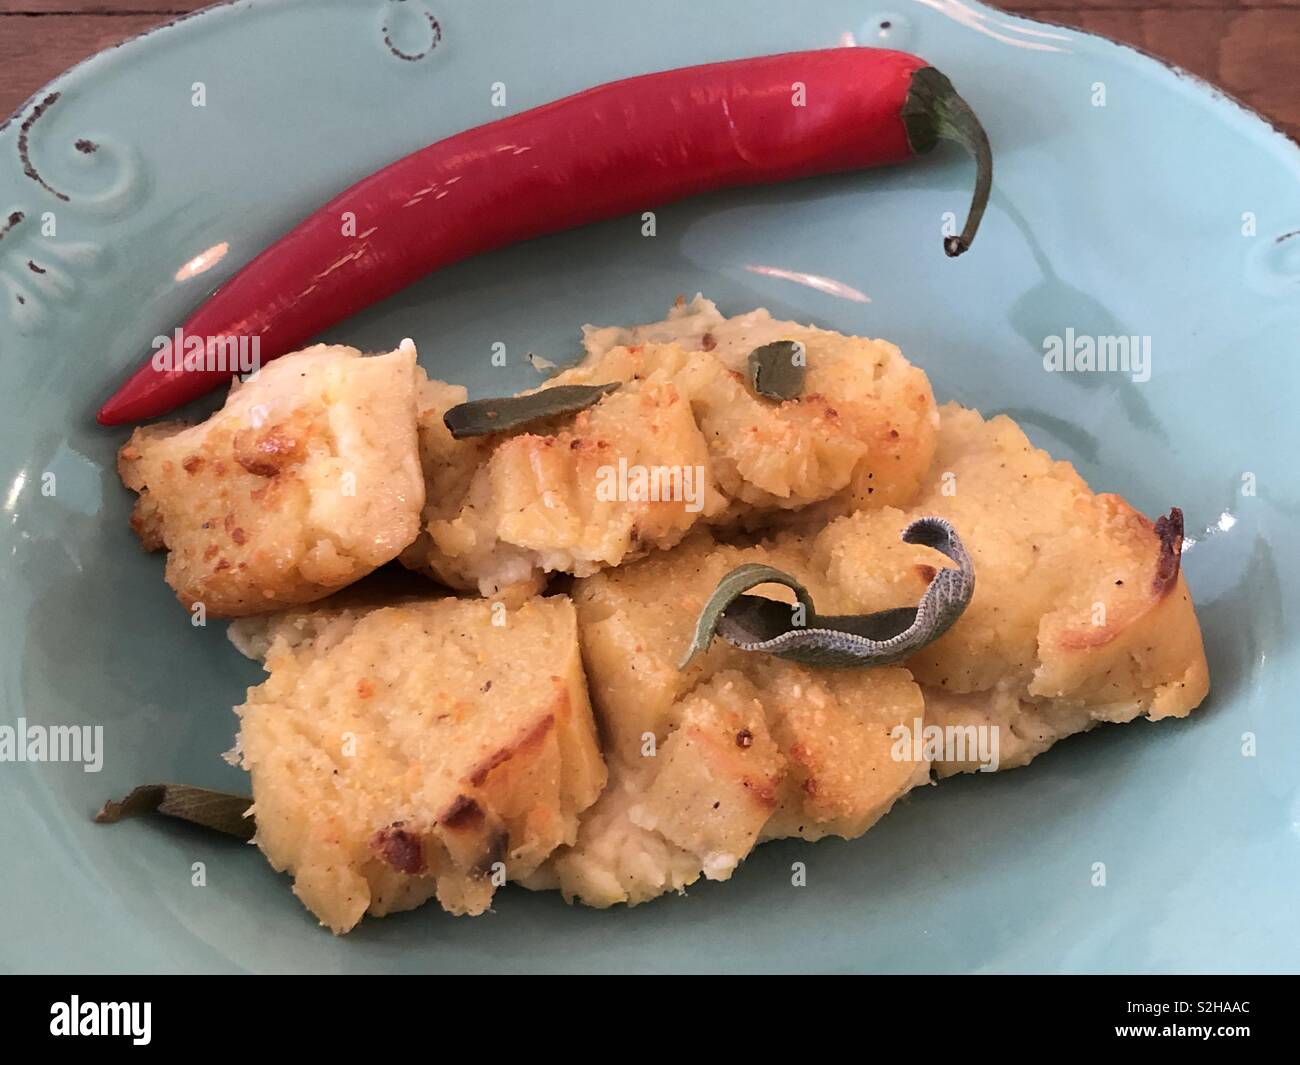 Gnocchi cake with a red chili pepper Stock Photo